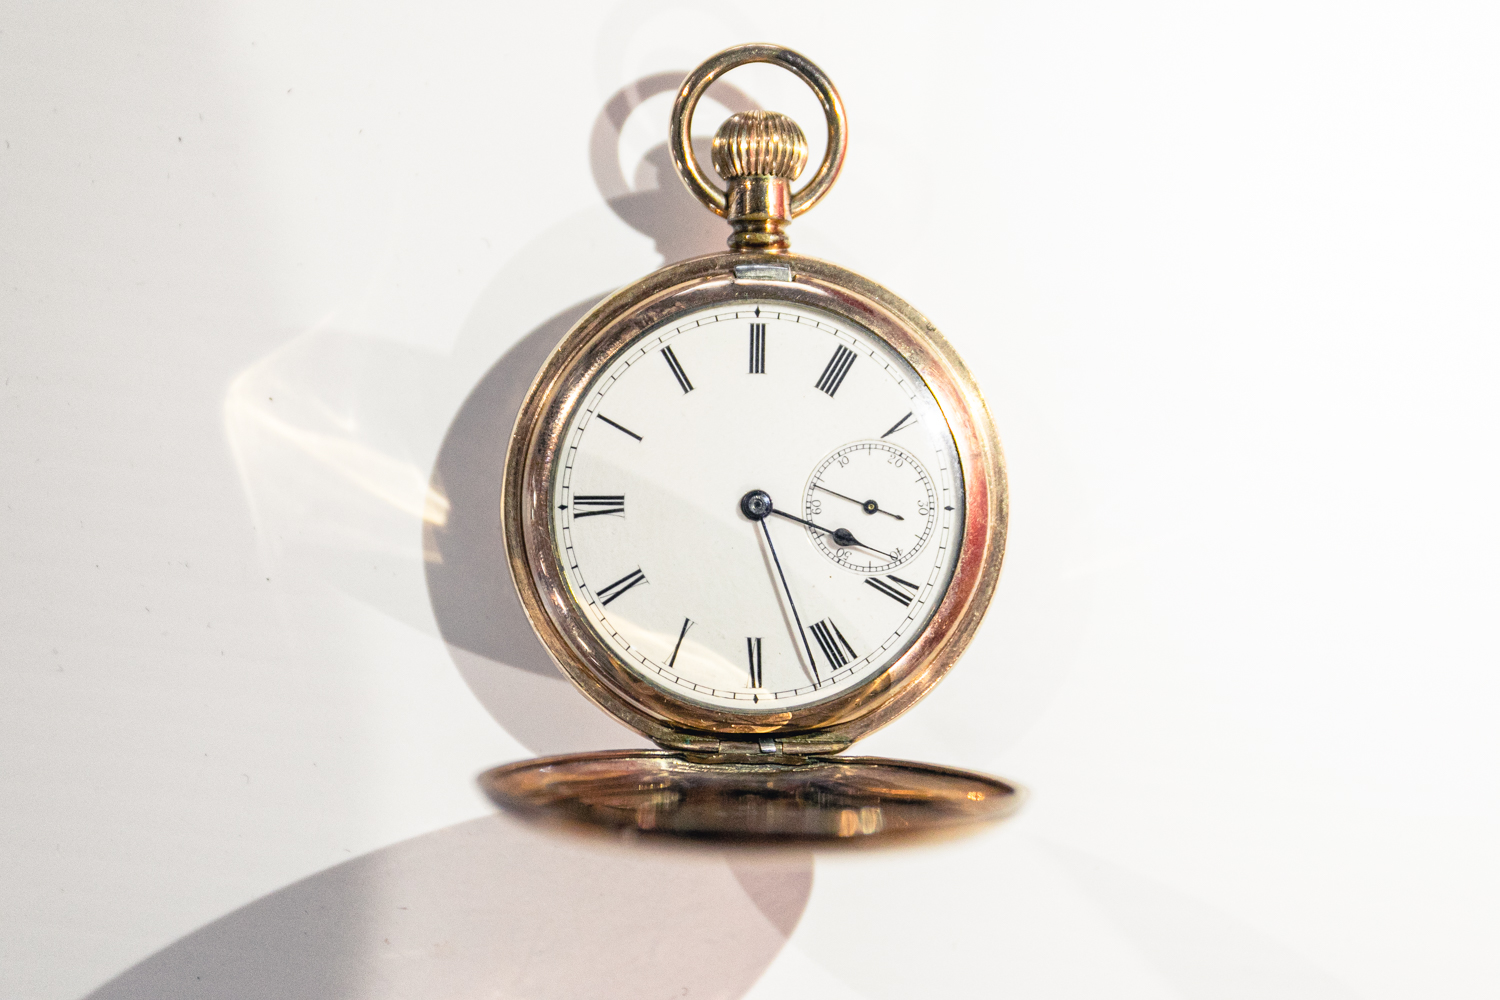 American Waltham Traveller's pocket watch given to Sirling's Father Alfred